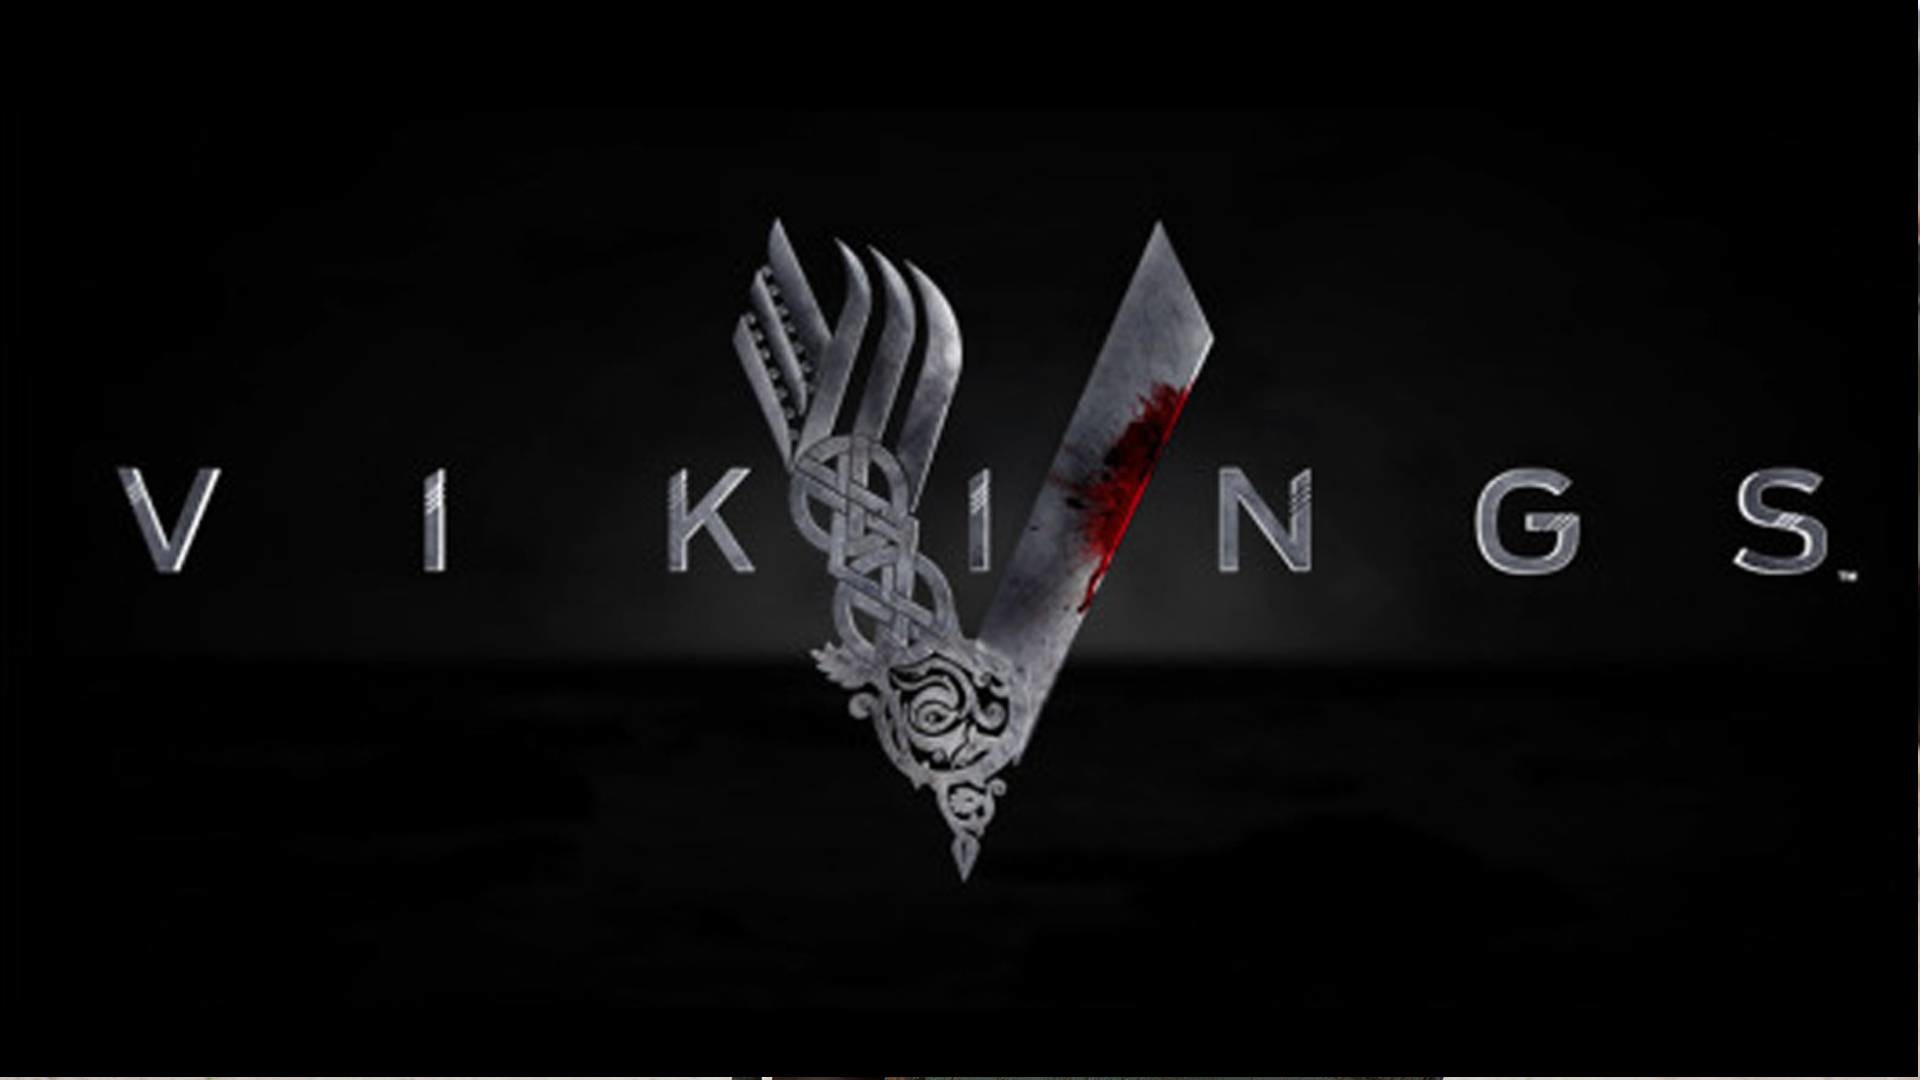 1920x1080 Vikings Wallpapers Pictures Images | HD Wallpapers | Pinterest | Vikings, Hd  wallpaper and Wallpaper